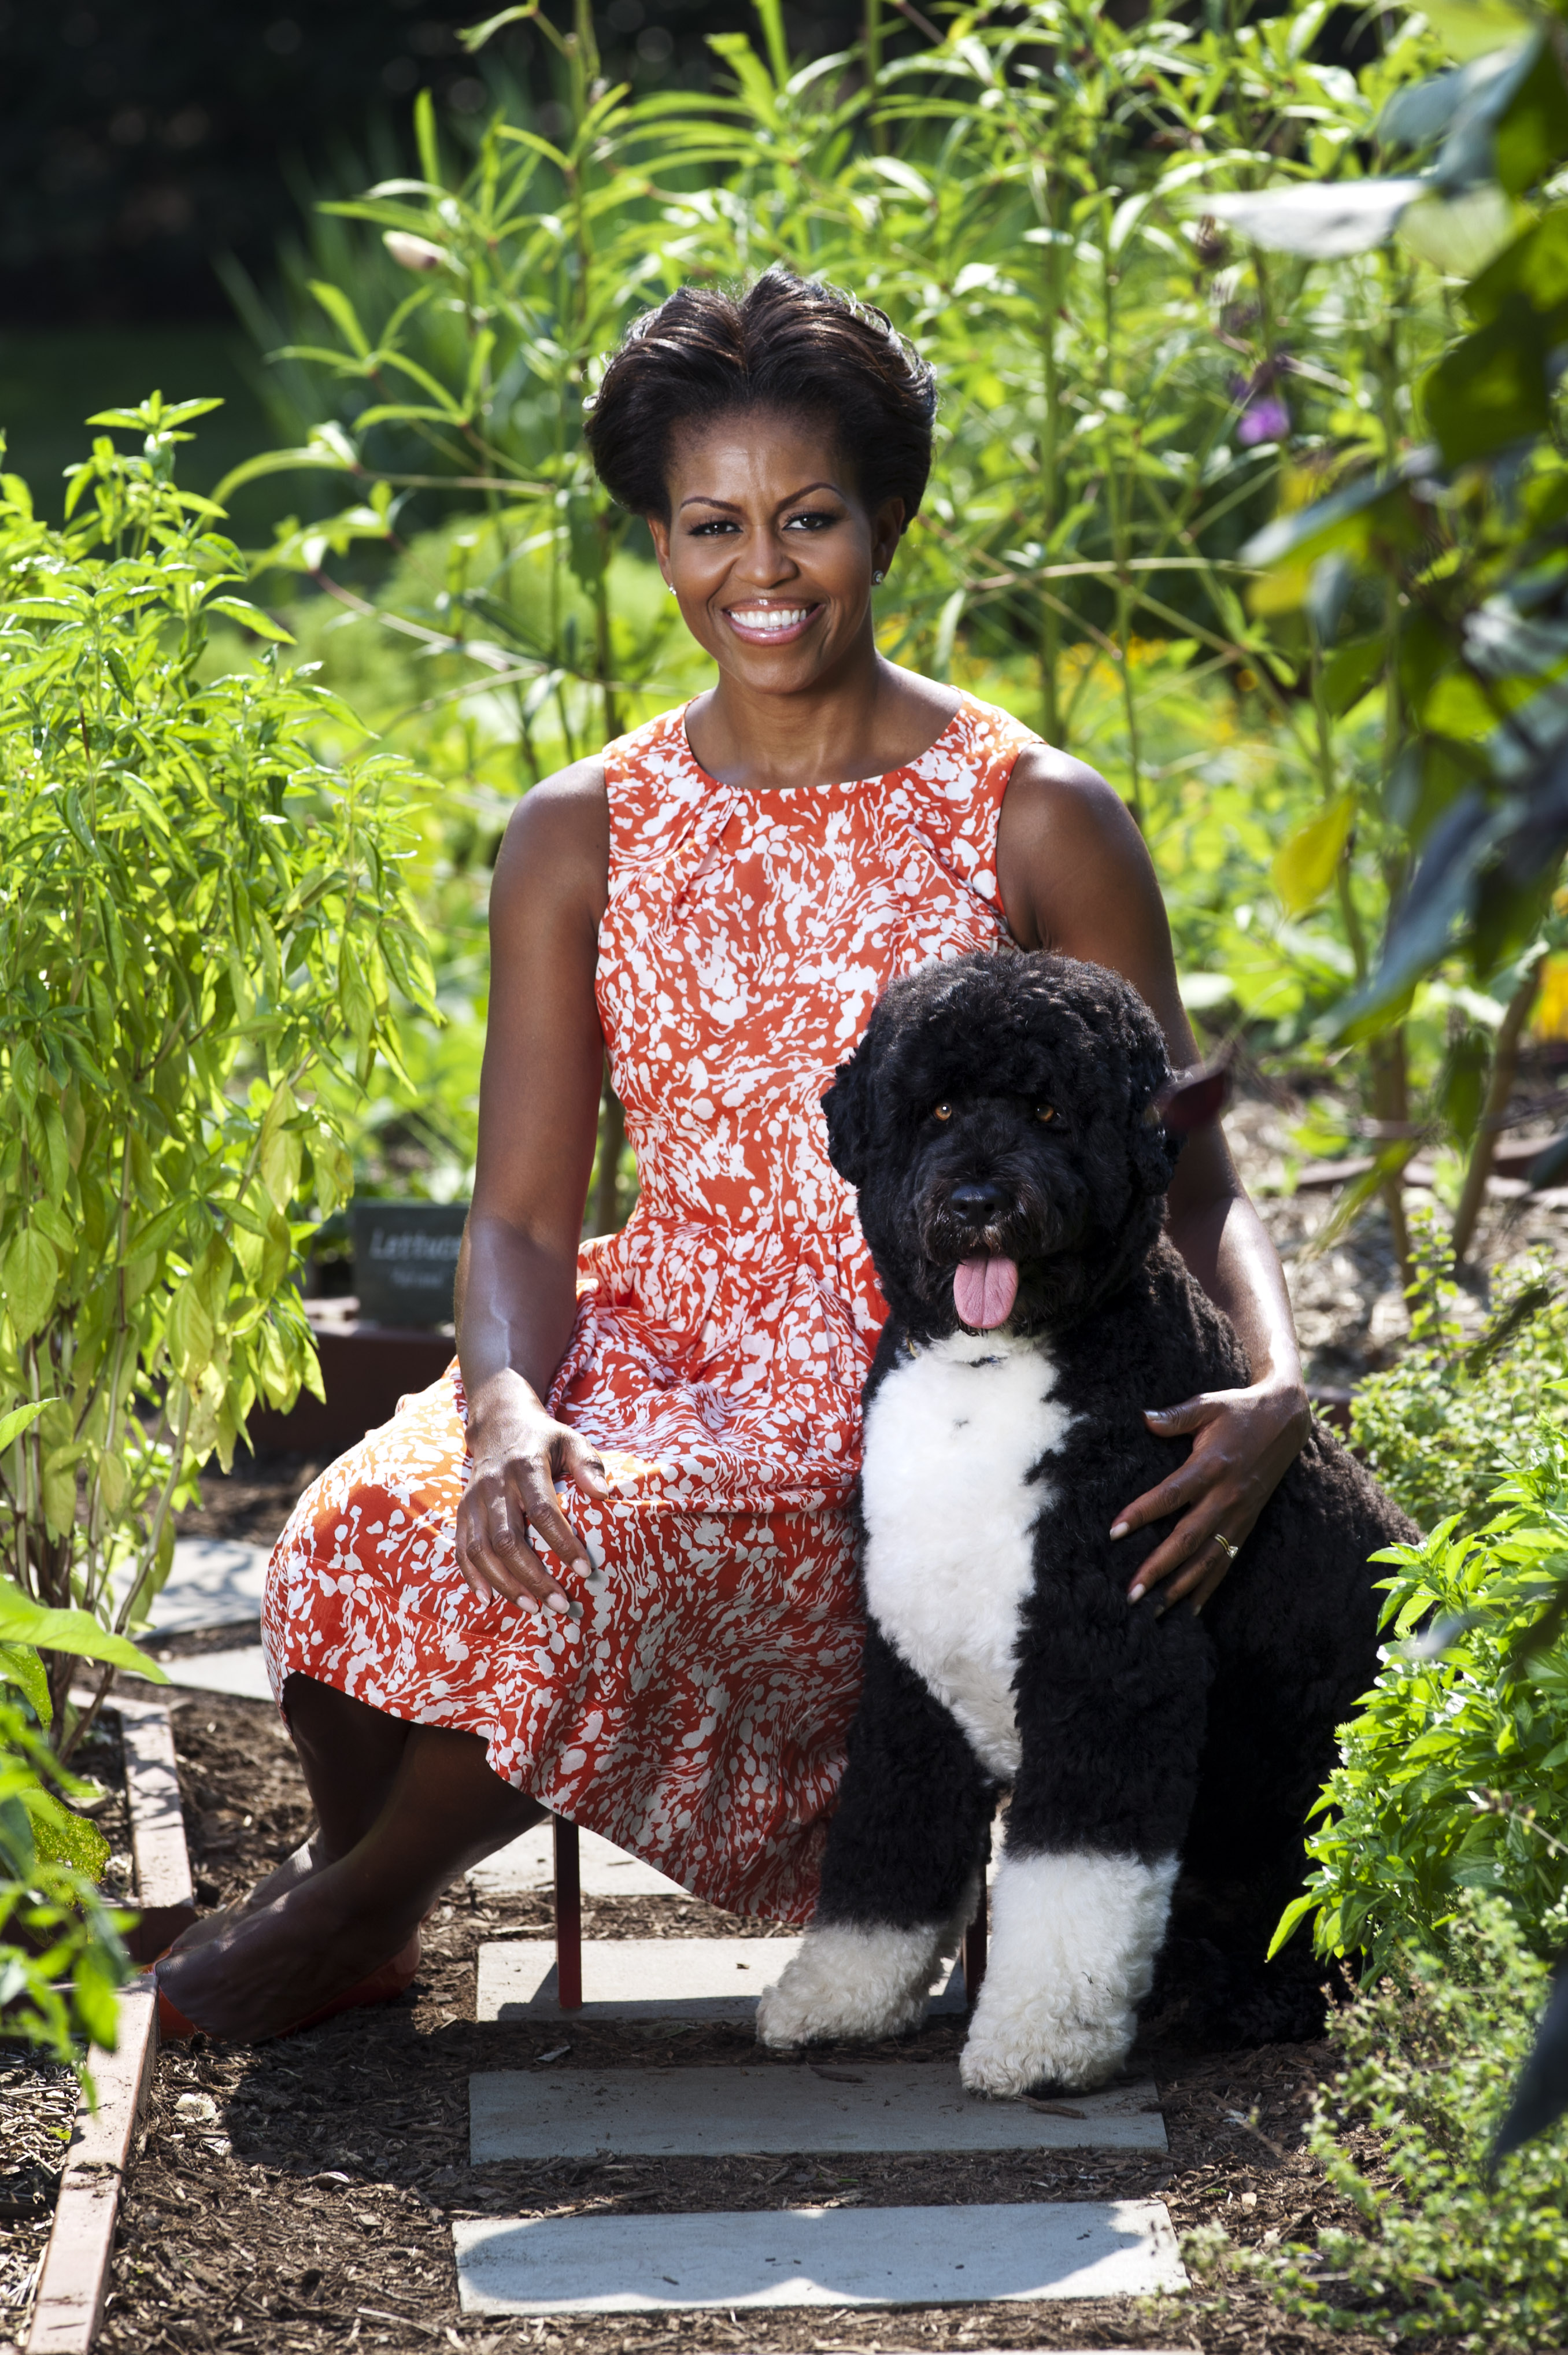 First Lady Michelle Obama sits for a photo with Bo, the first family's dog, in the White House Kitchen Garden.